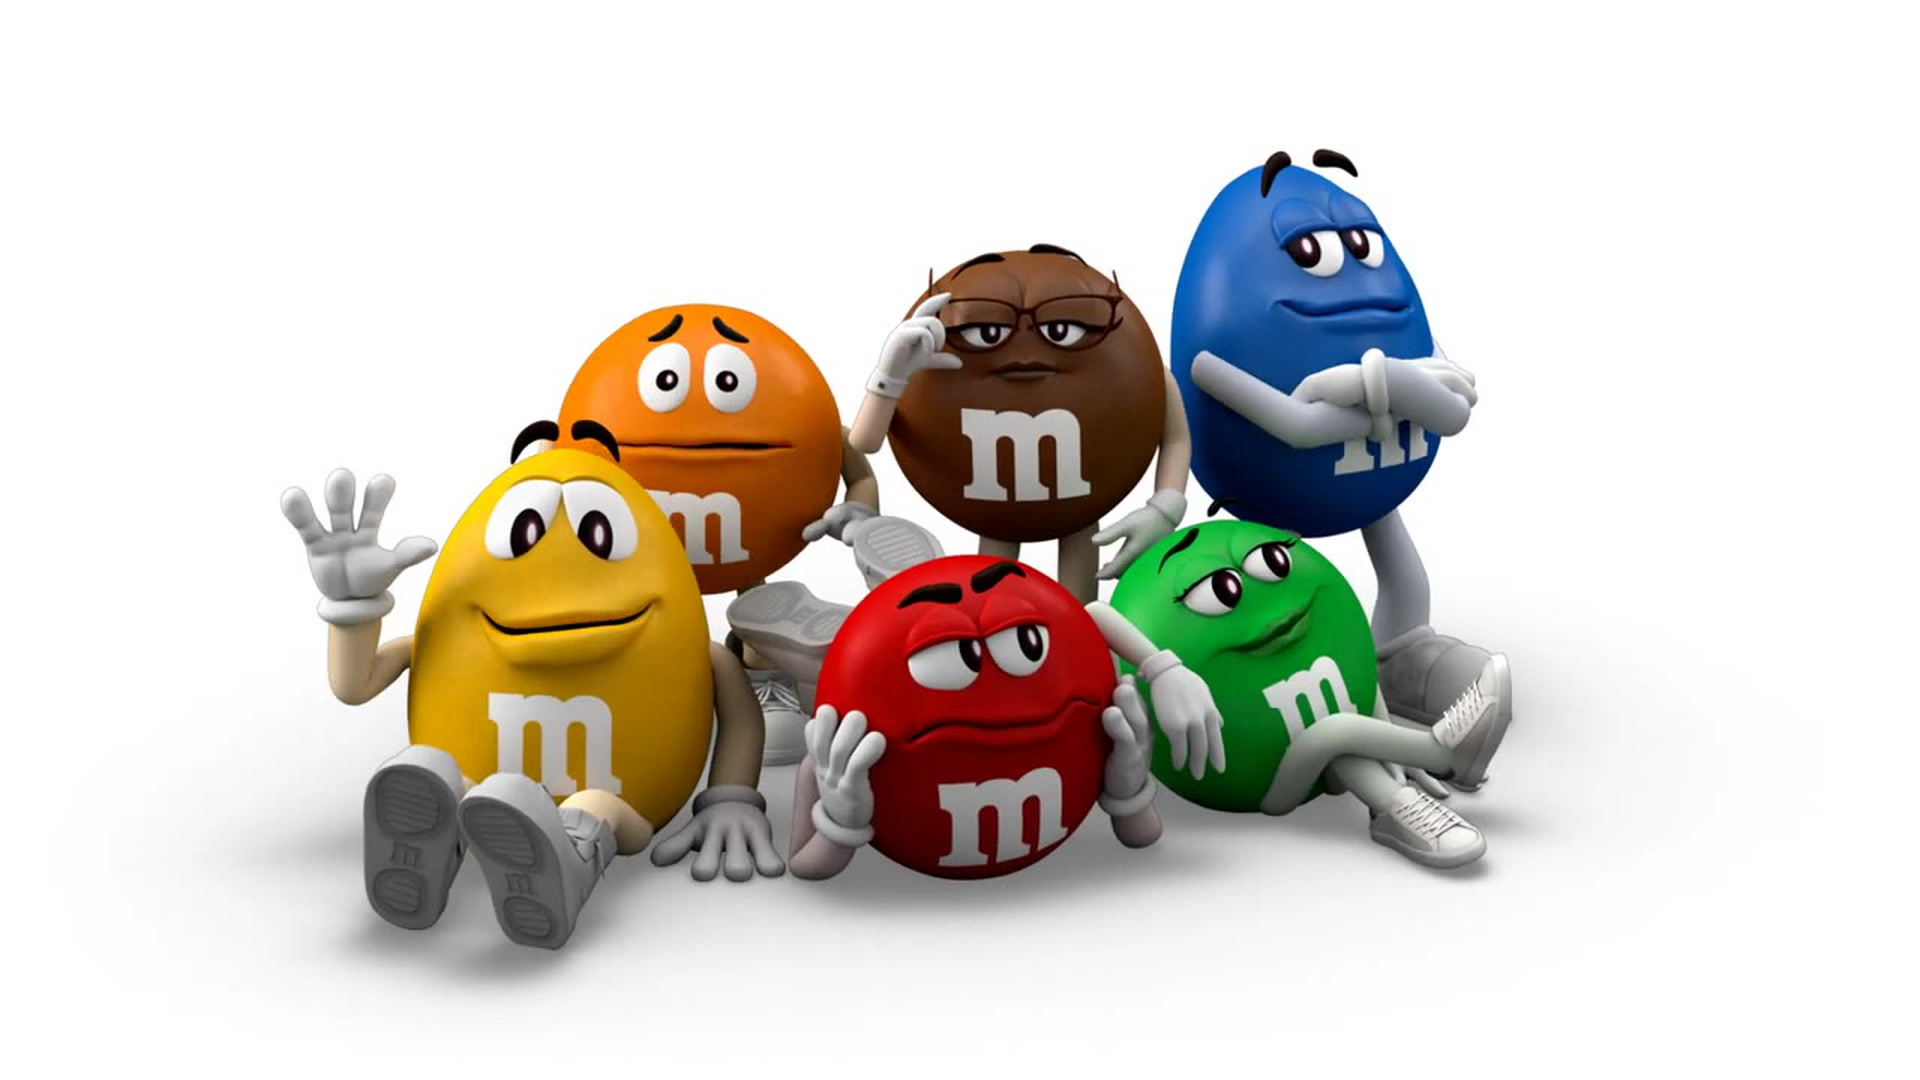 Are Purple M&M's Being Added to Your Favorite M&M Colors?